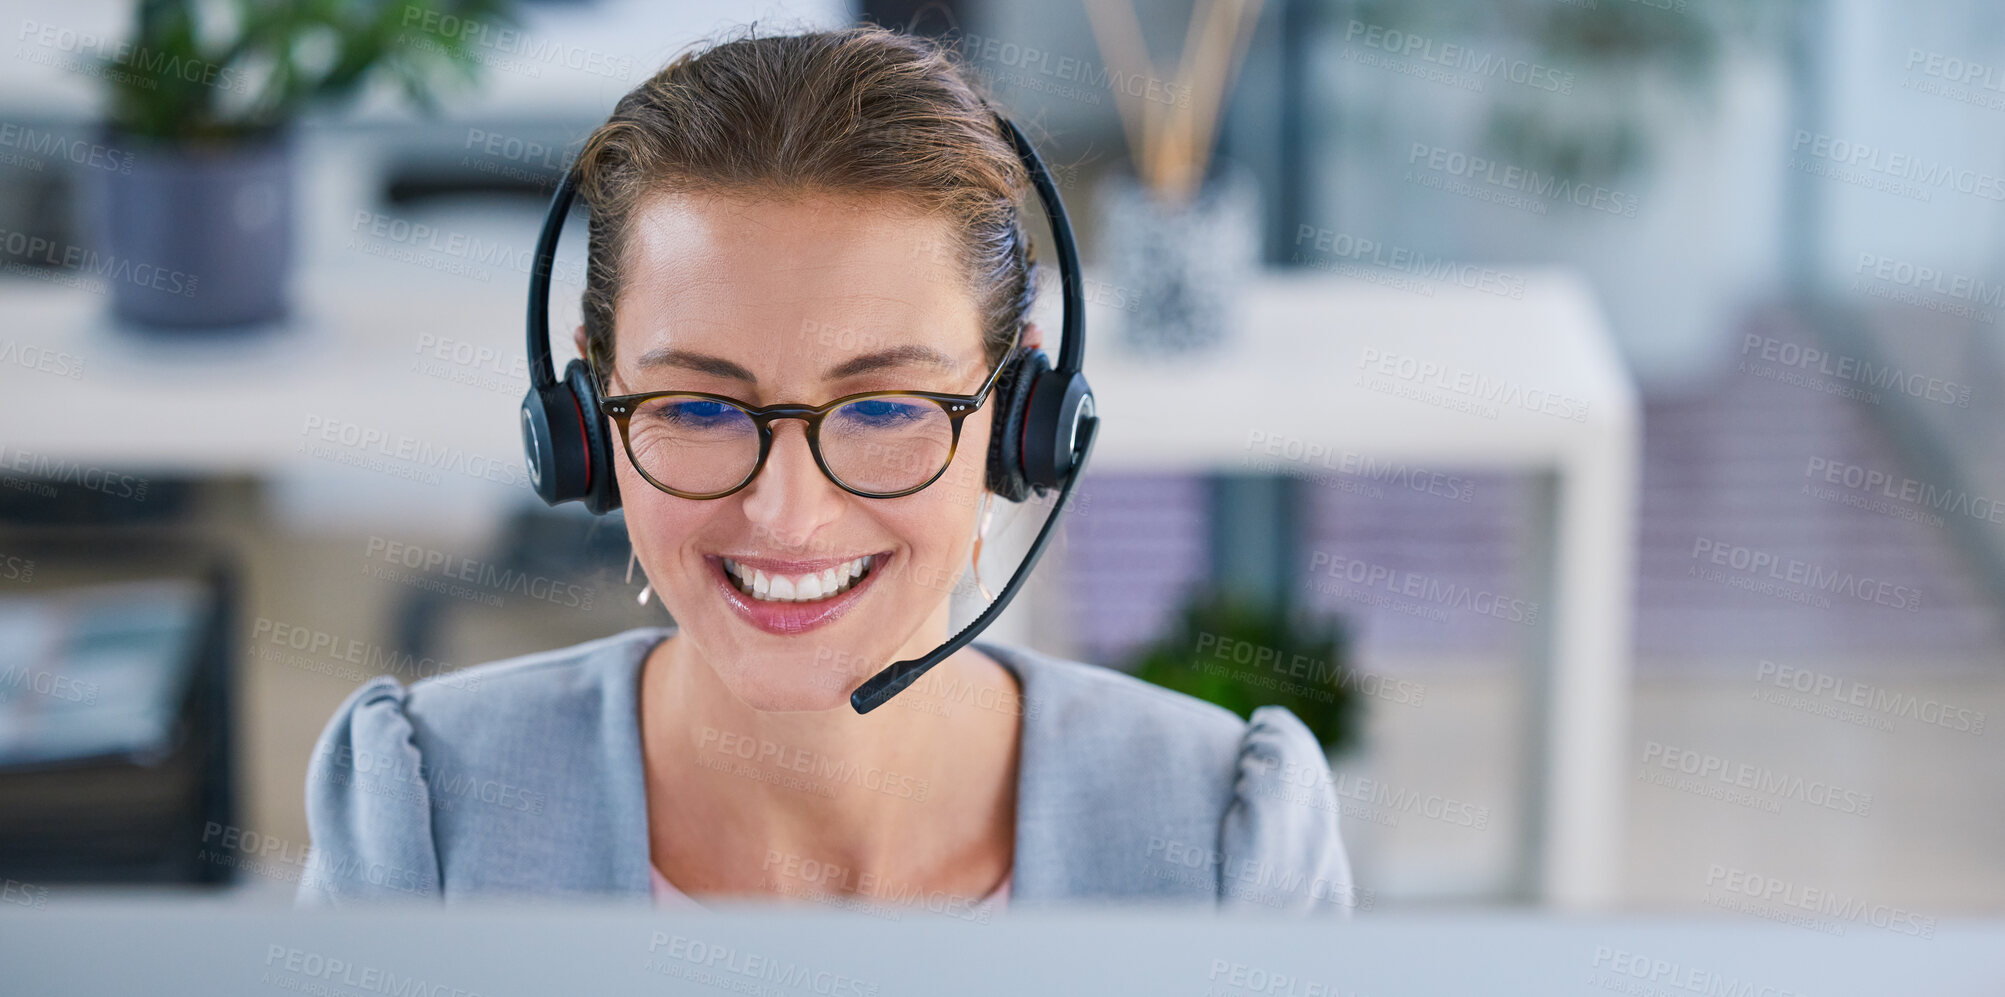 Buy stock photo Happy, smiling and friendly call center agent or telemarketing operator wearing headset while working in an office. Smile of a sales consultant operating helpdesk for customer and service support
